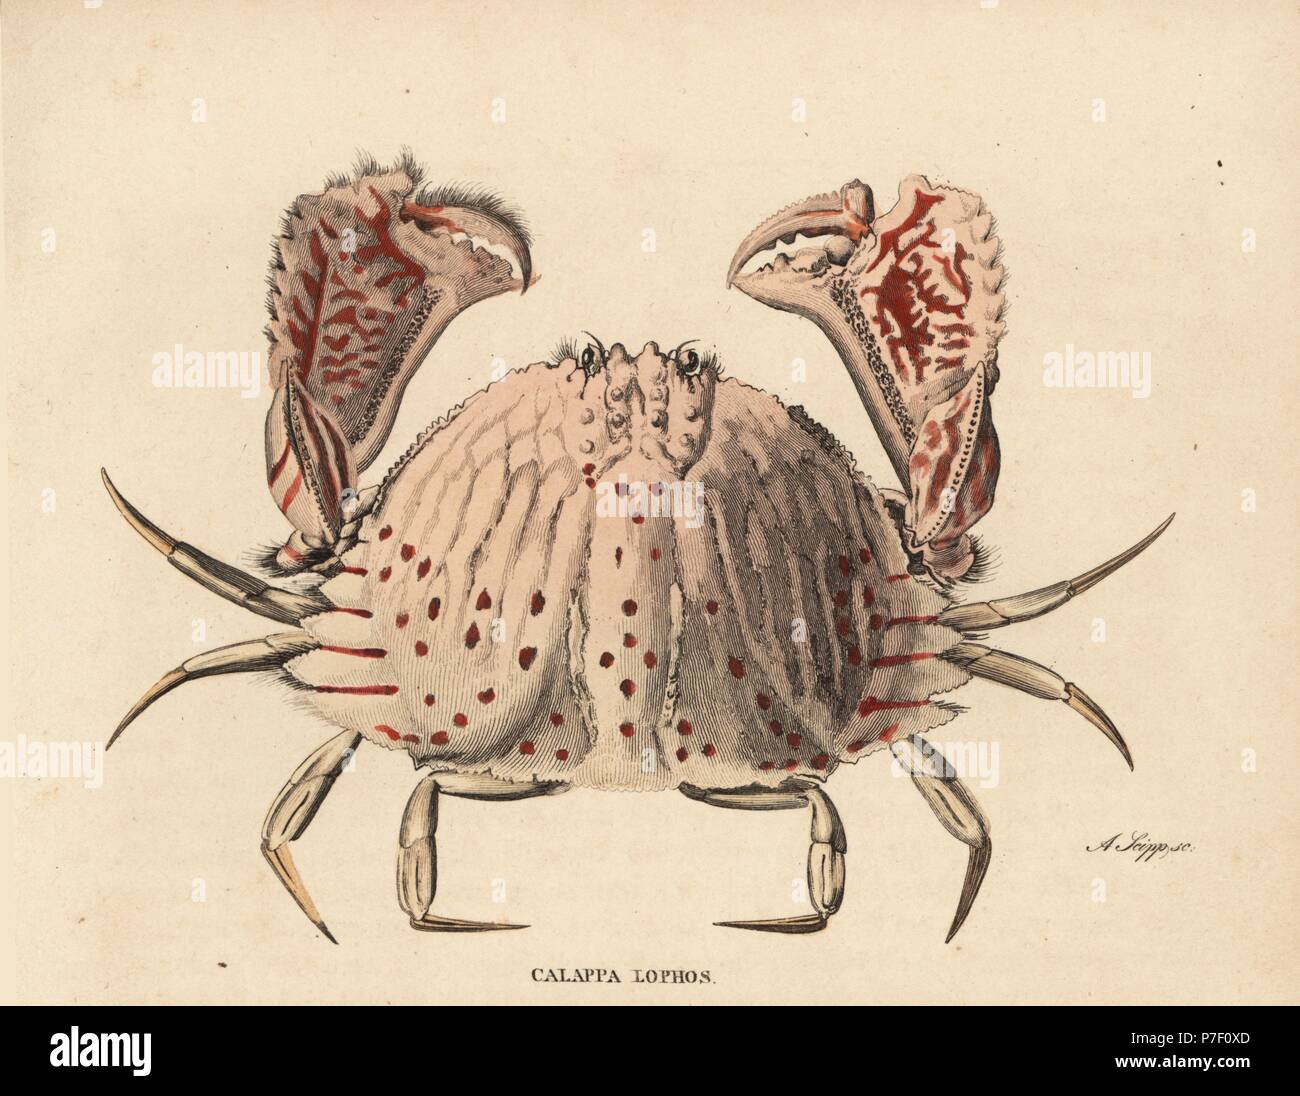 Smooth or red-spotted box crab, Calappa calappa (Calappa lophos). Handcoloured steel engraving by A. Scipp from Georg Friedrich Treitschke's Gallery of Natural History, Naturhistorischer Bildersaal des Thierreiches, Liepzig, 1842. Stock Photo